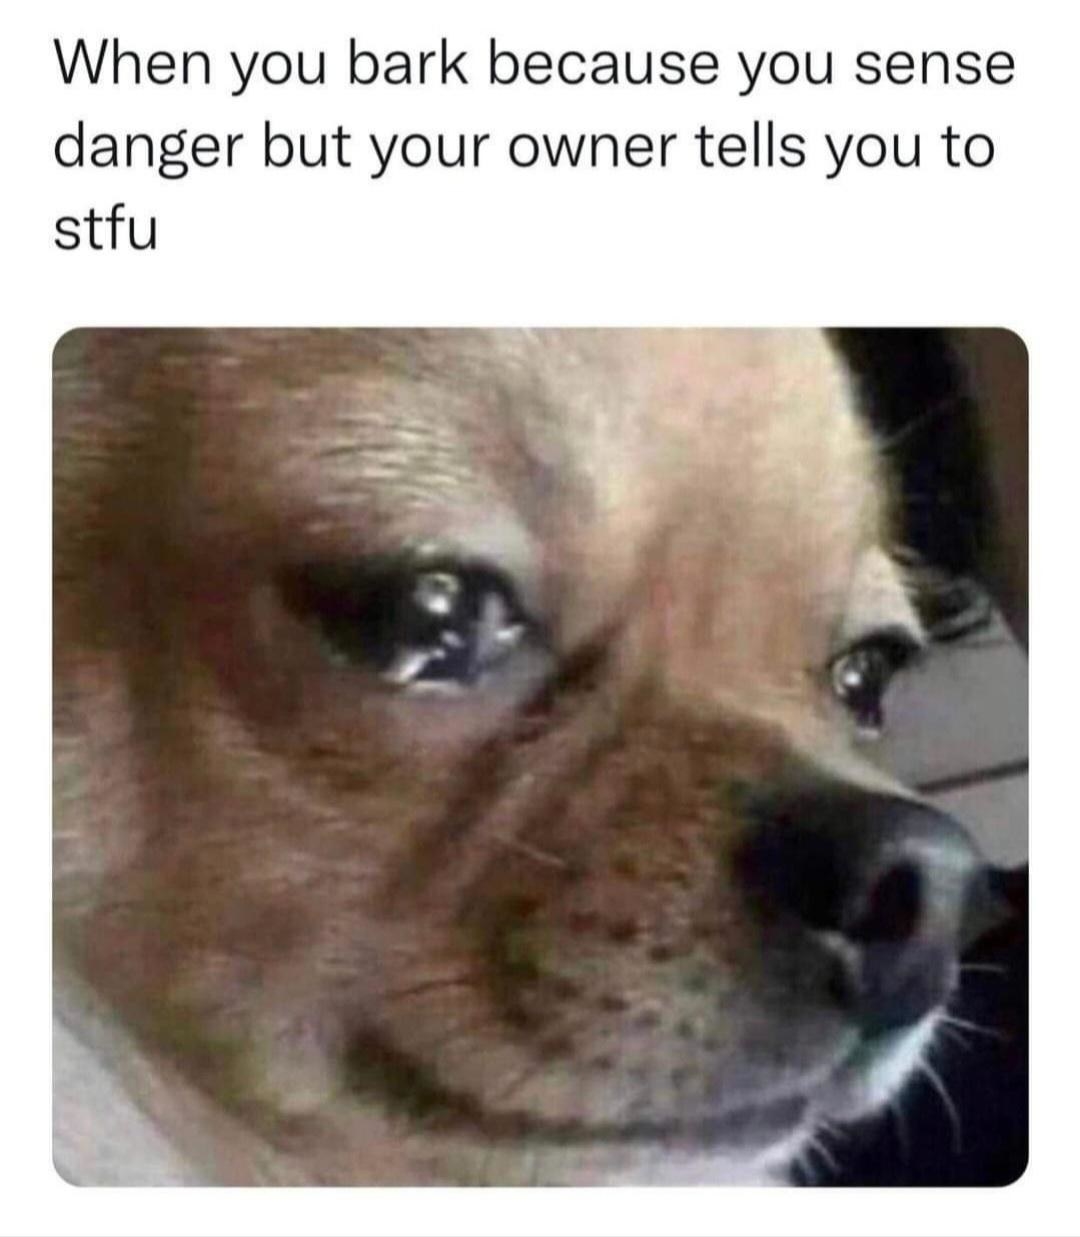 a crying dog with text that says &quot;when you bark because you sense danger but your owner tells you to stfu&quot;